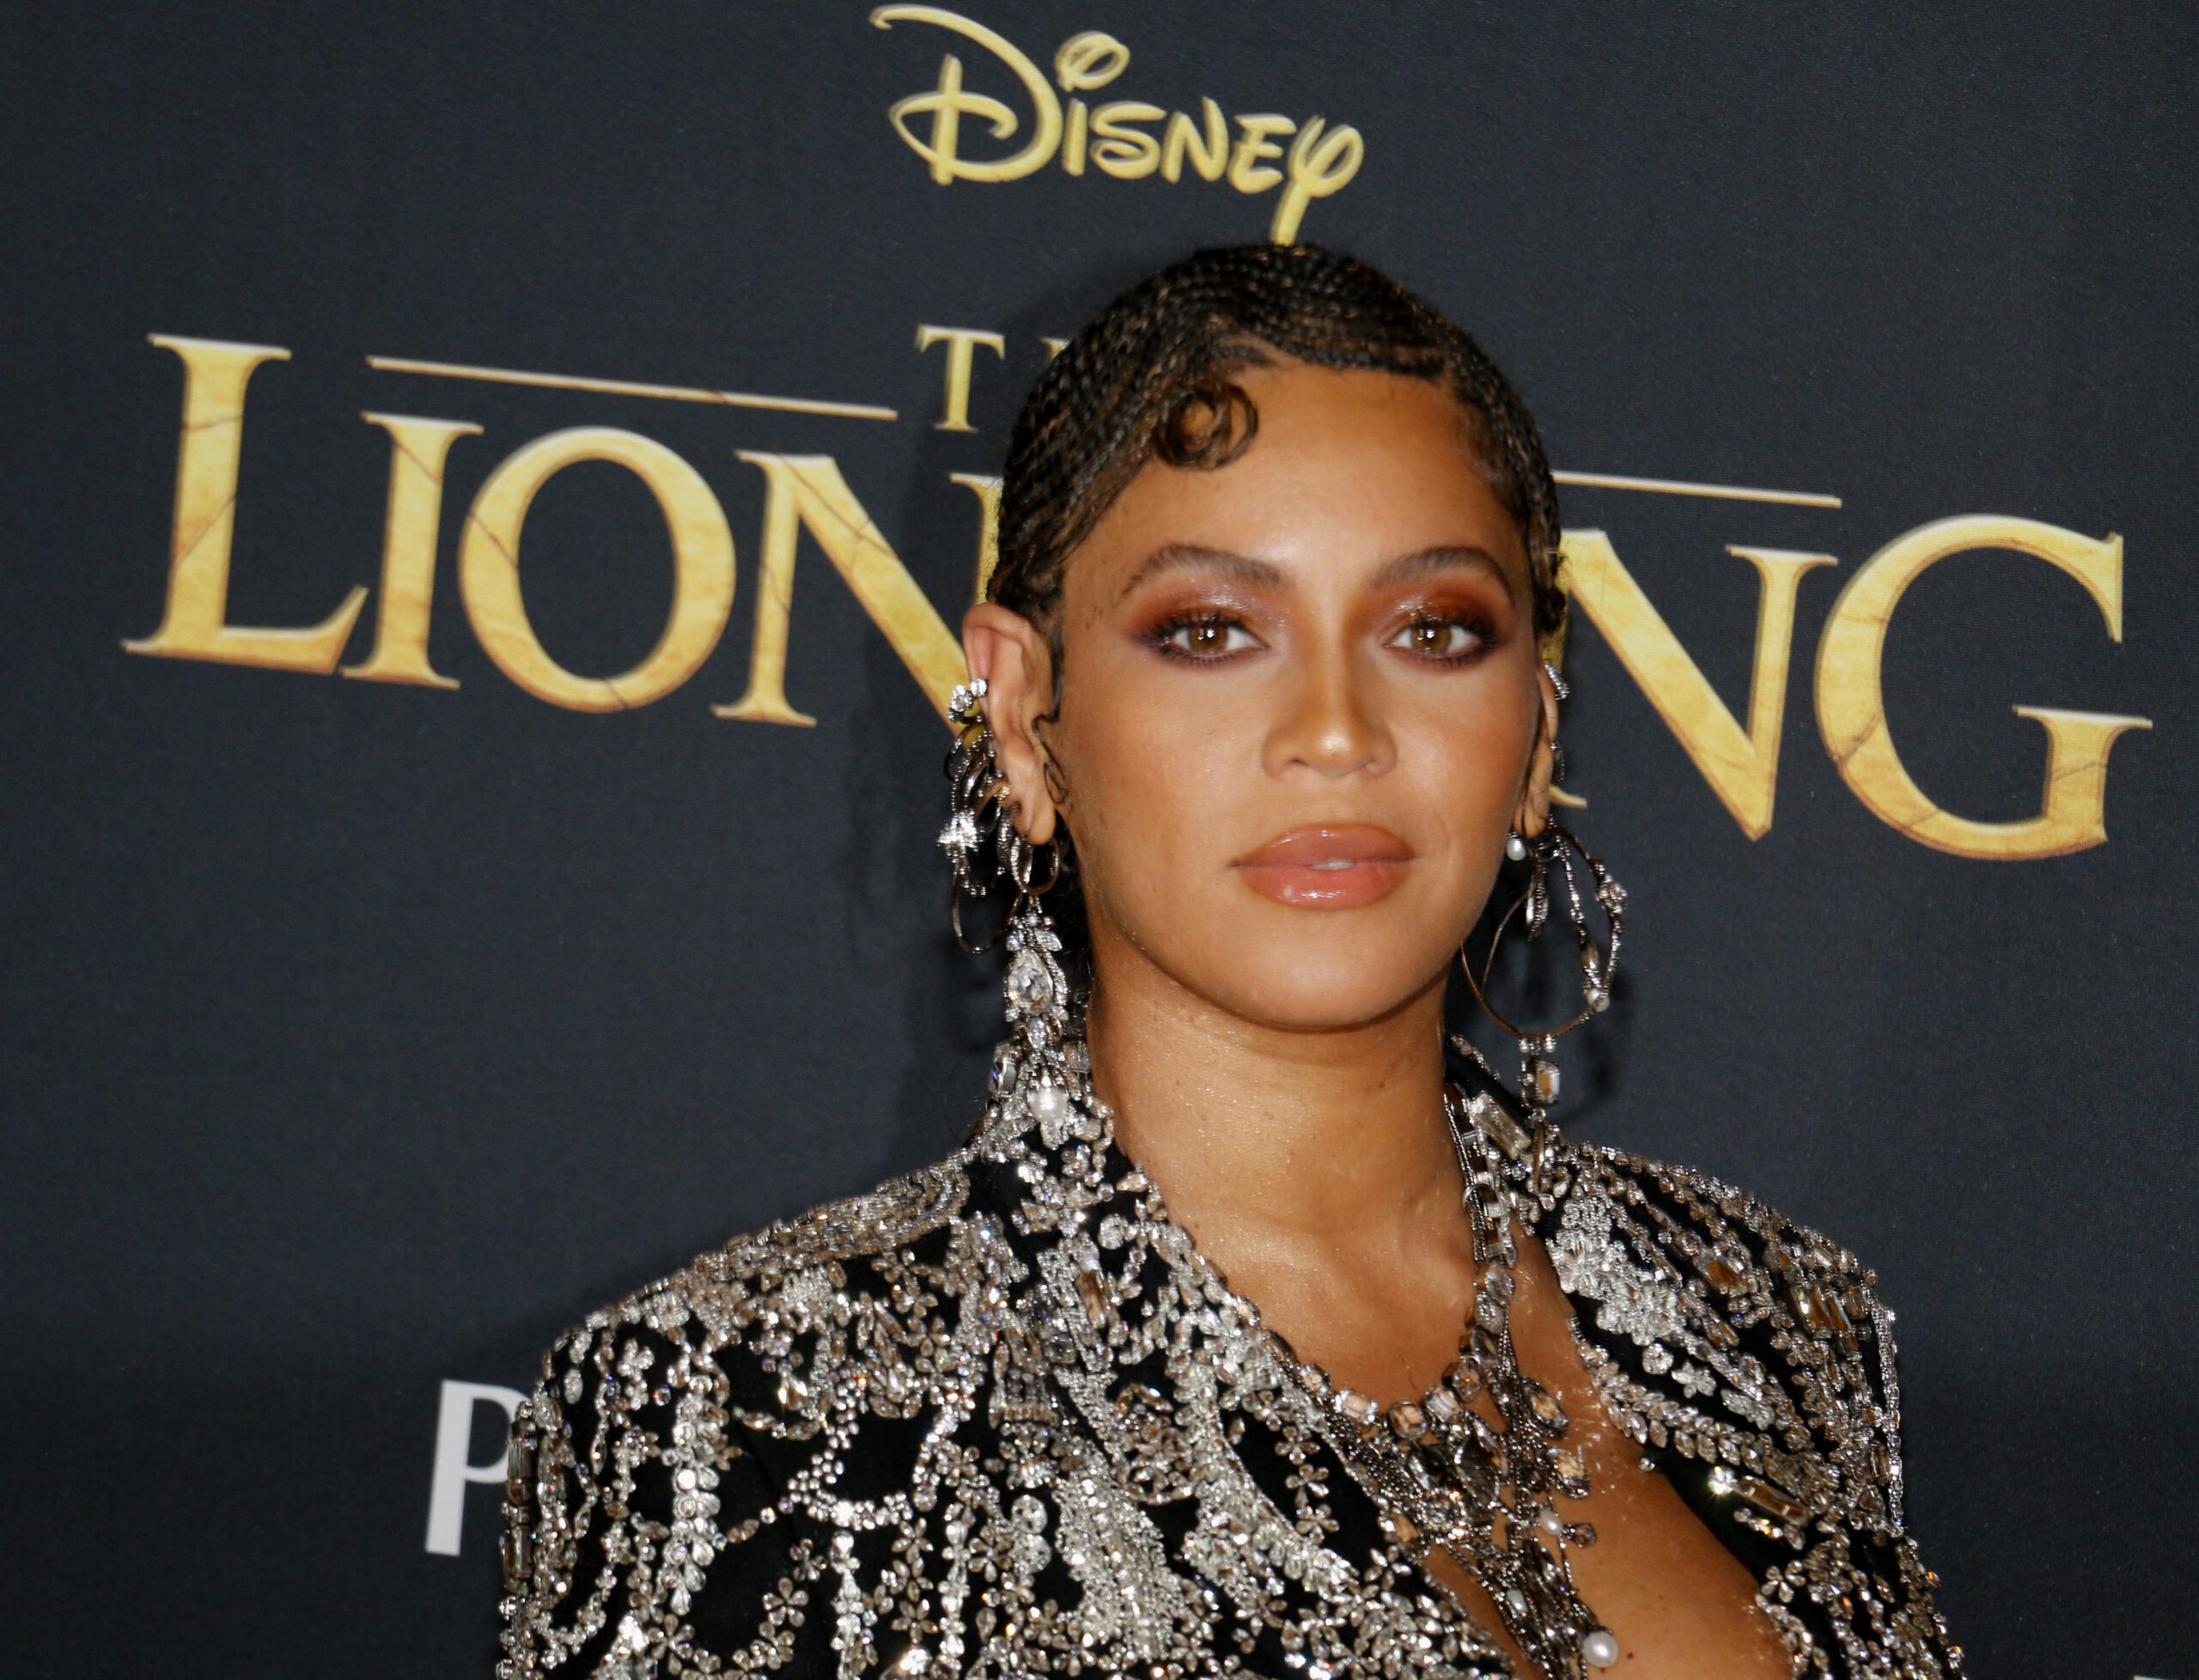 <p>Concerts by top stars like Beyoncé often have expensive tickets. Ticket prices for Queen Bey’s ninth tour varied depending on the seat category and location. Average seats cost around $350, while those closer to the stage ranged from $850 to $2,600. Club Renaissance tickets ranged from $3,000 to $6,300, whereas fans paid around $5,000 or more for standing in B-Hive A.</p>